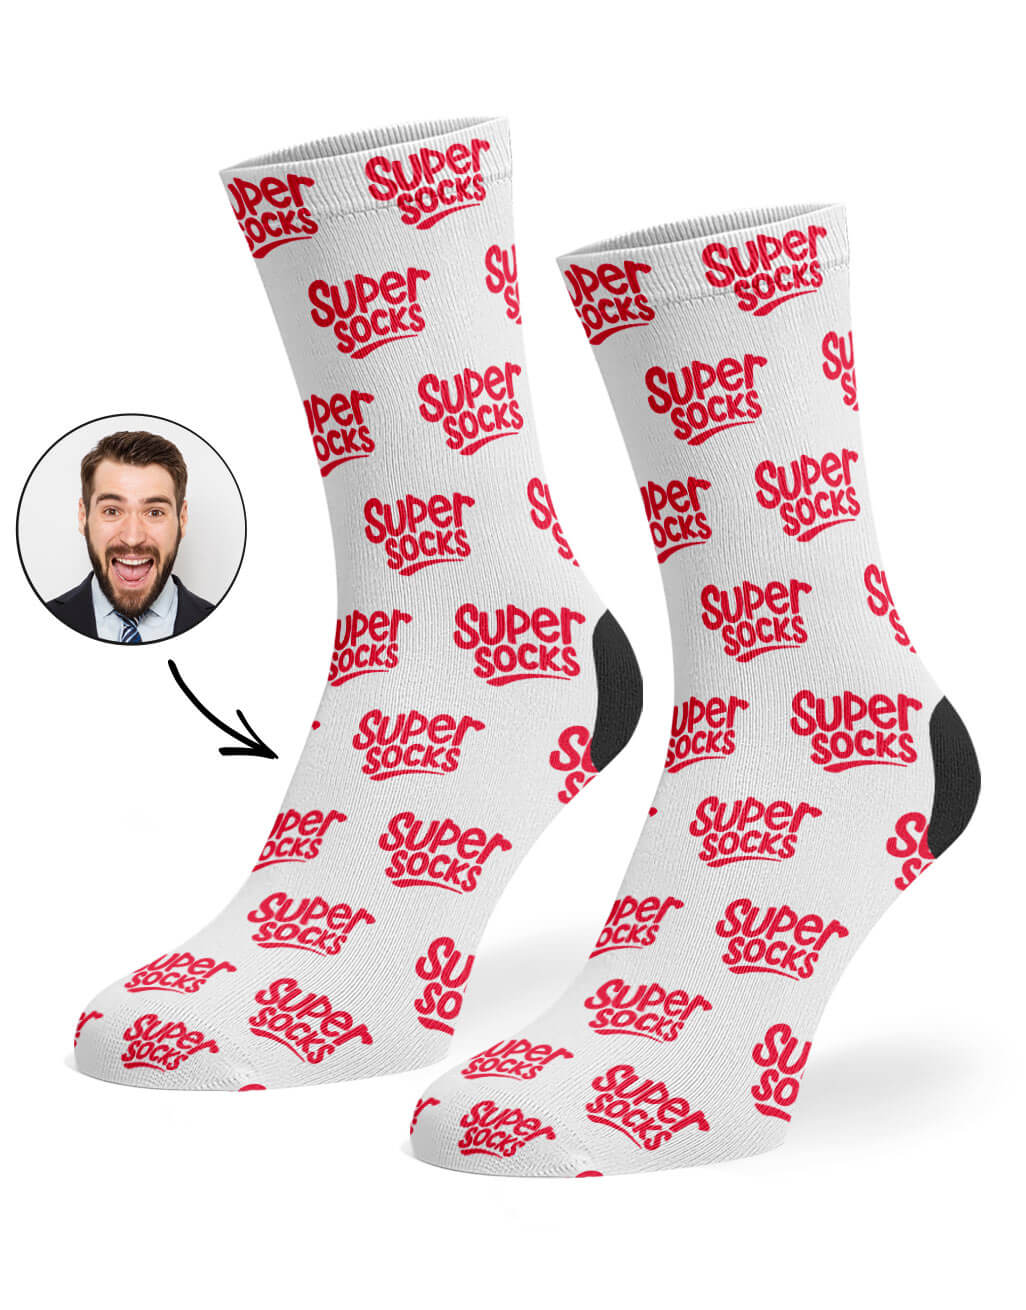 socks with your logo on them